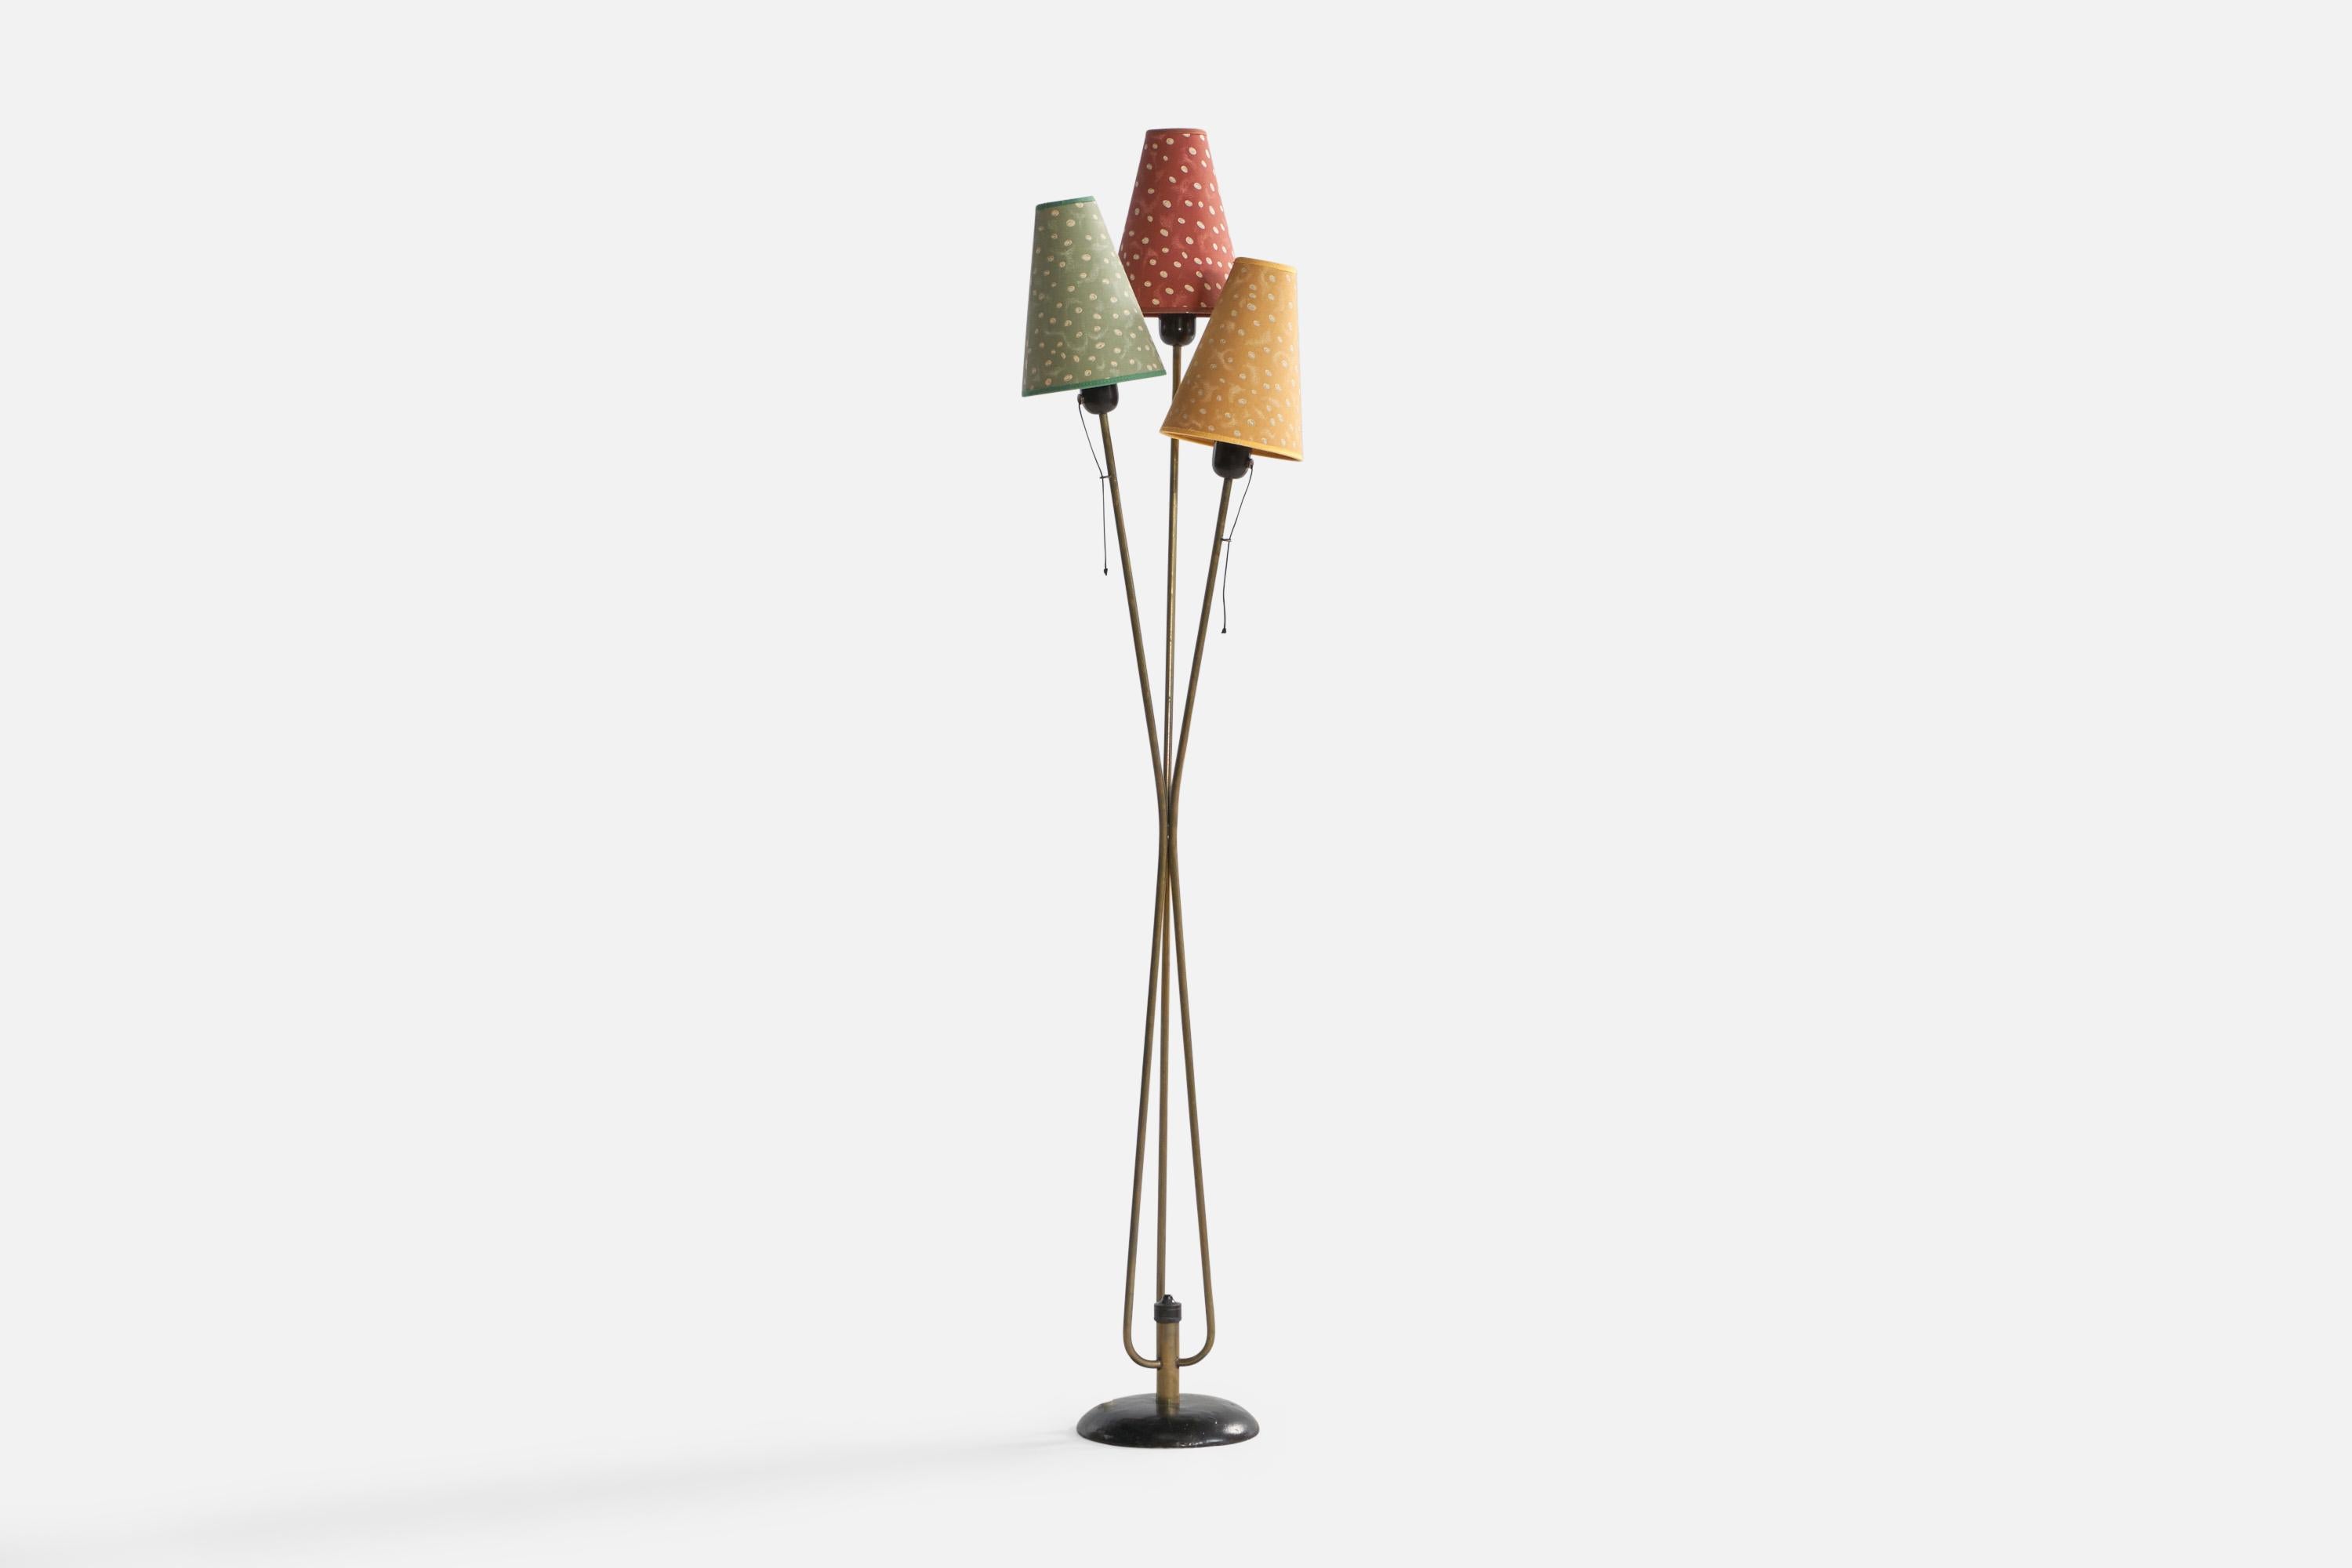 A brass, black-lacquered metal and green, yellow and red fabric floor lamp designed and produced in Sweden, c. 1960s.

Overall Dimensions (inches): 53.5” H x 11.5” W x 11” D. Stated dimensions include shades.
Bulb Specifications: E-26 Bulbs
Number